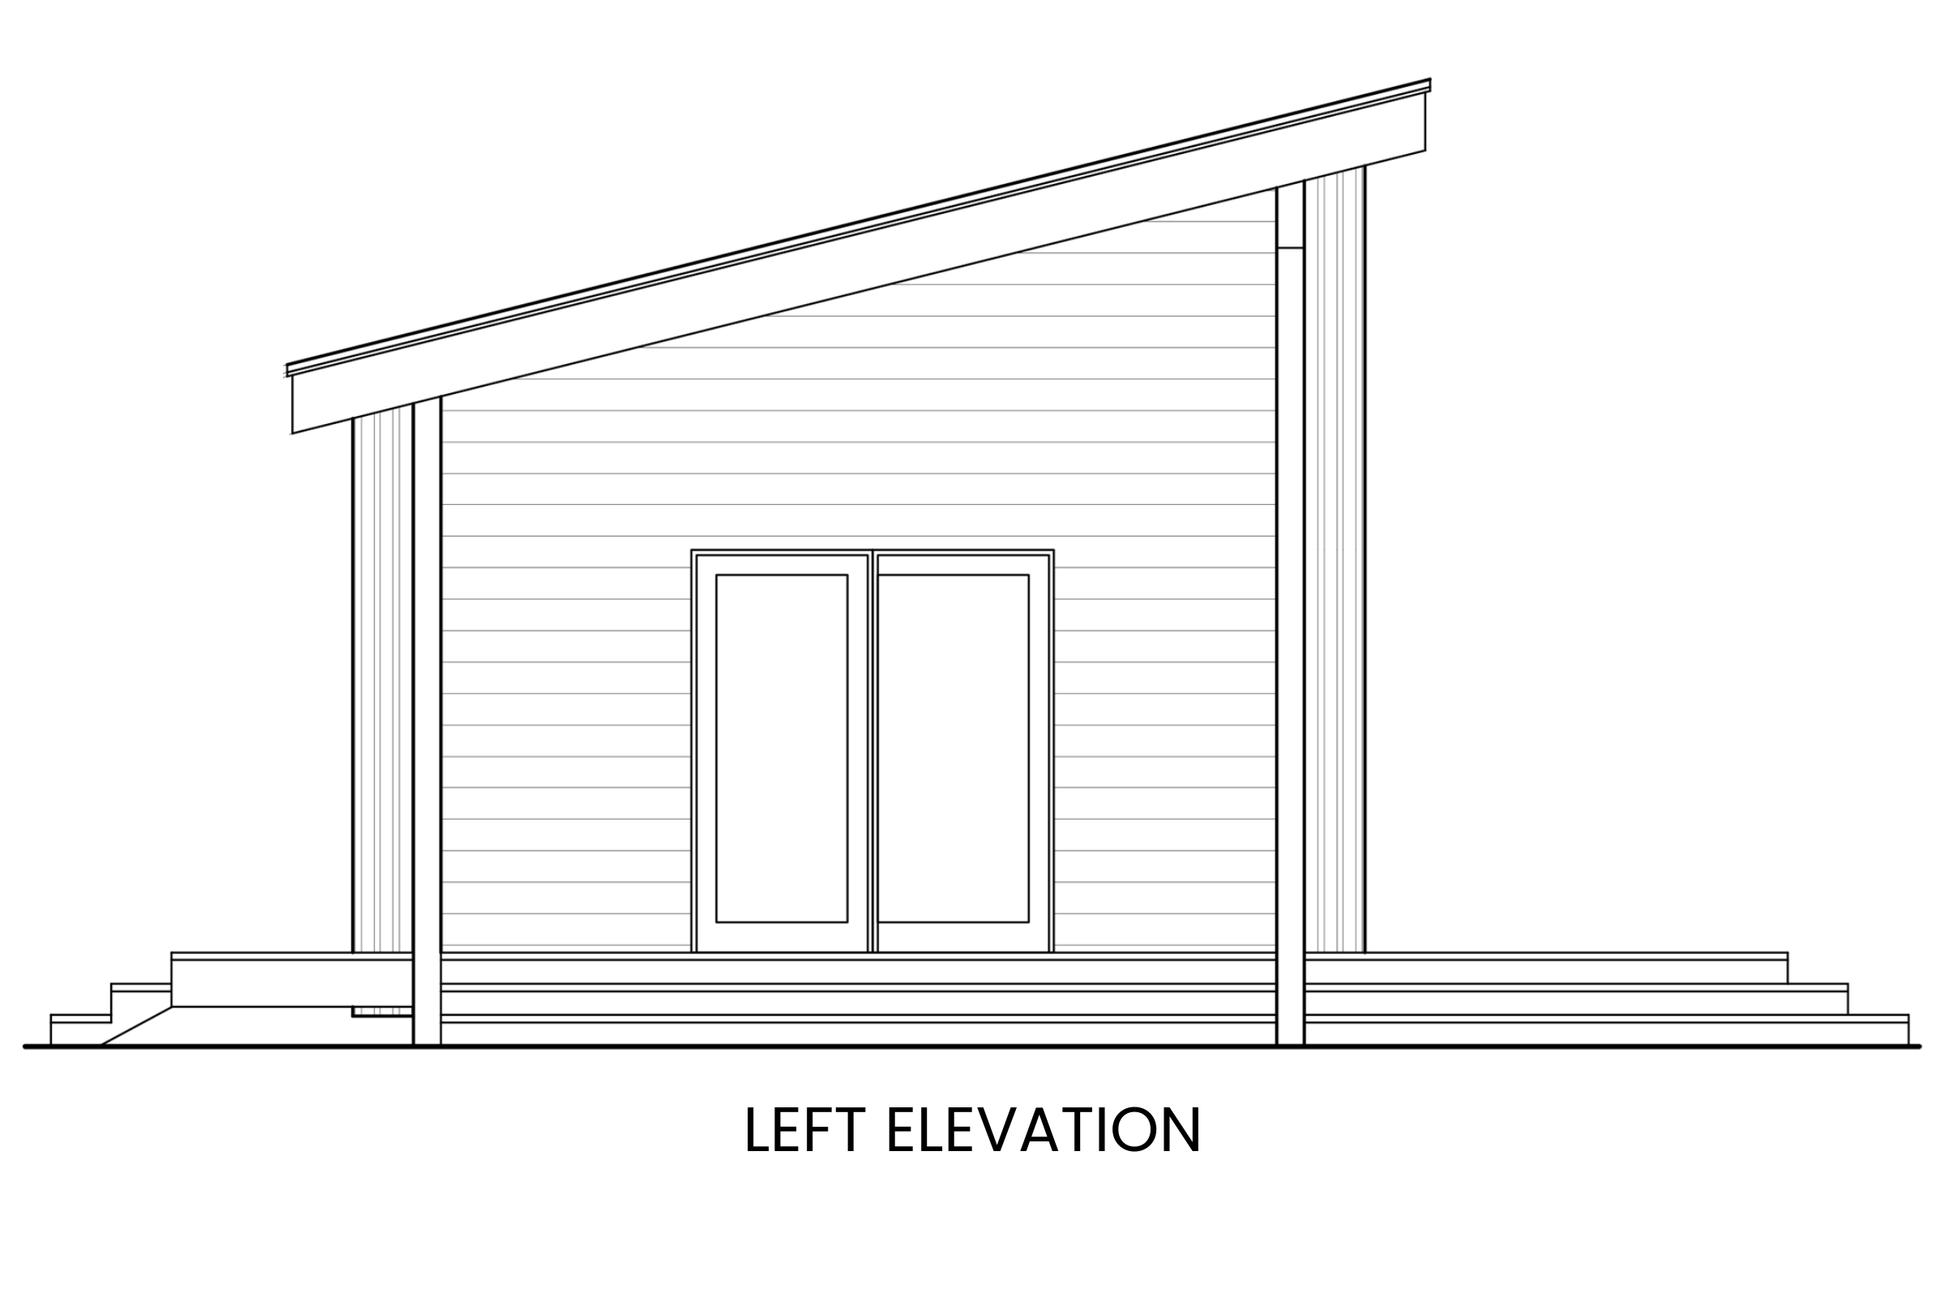 Contemporary-Tiny-Home-Plan-Left-Elevation-Rocky-Mountain-Plan-Company-Snapdragon